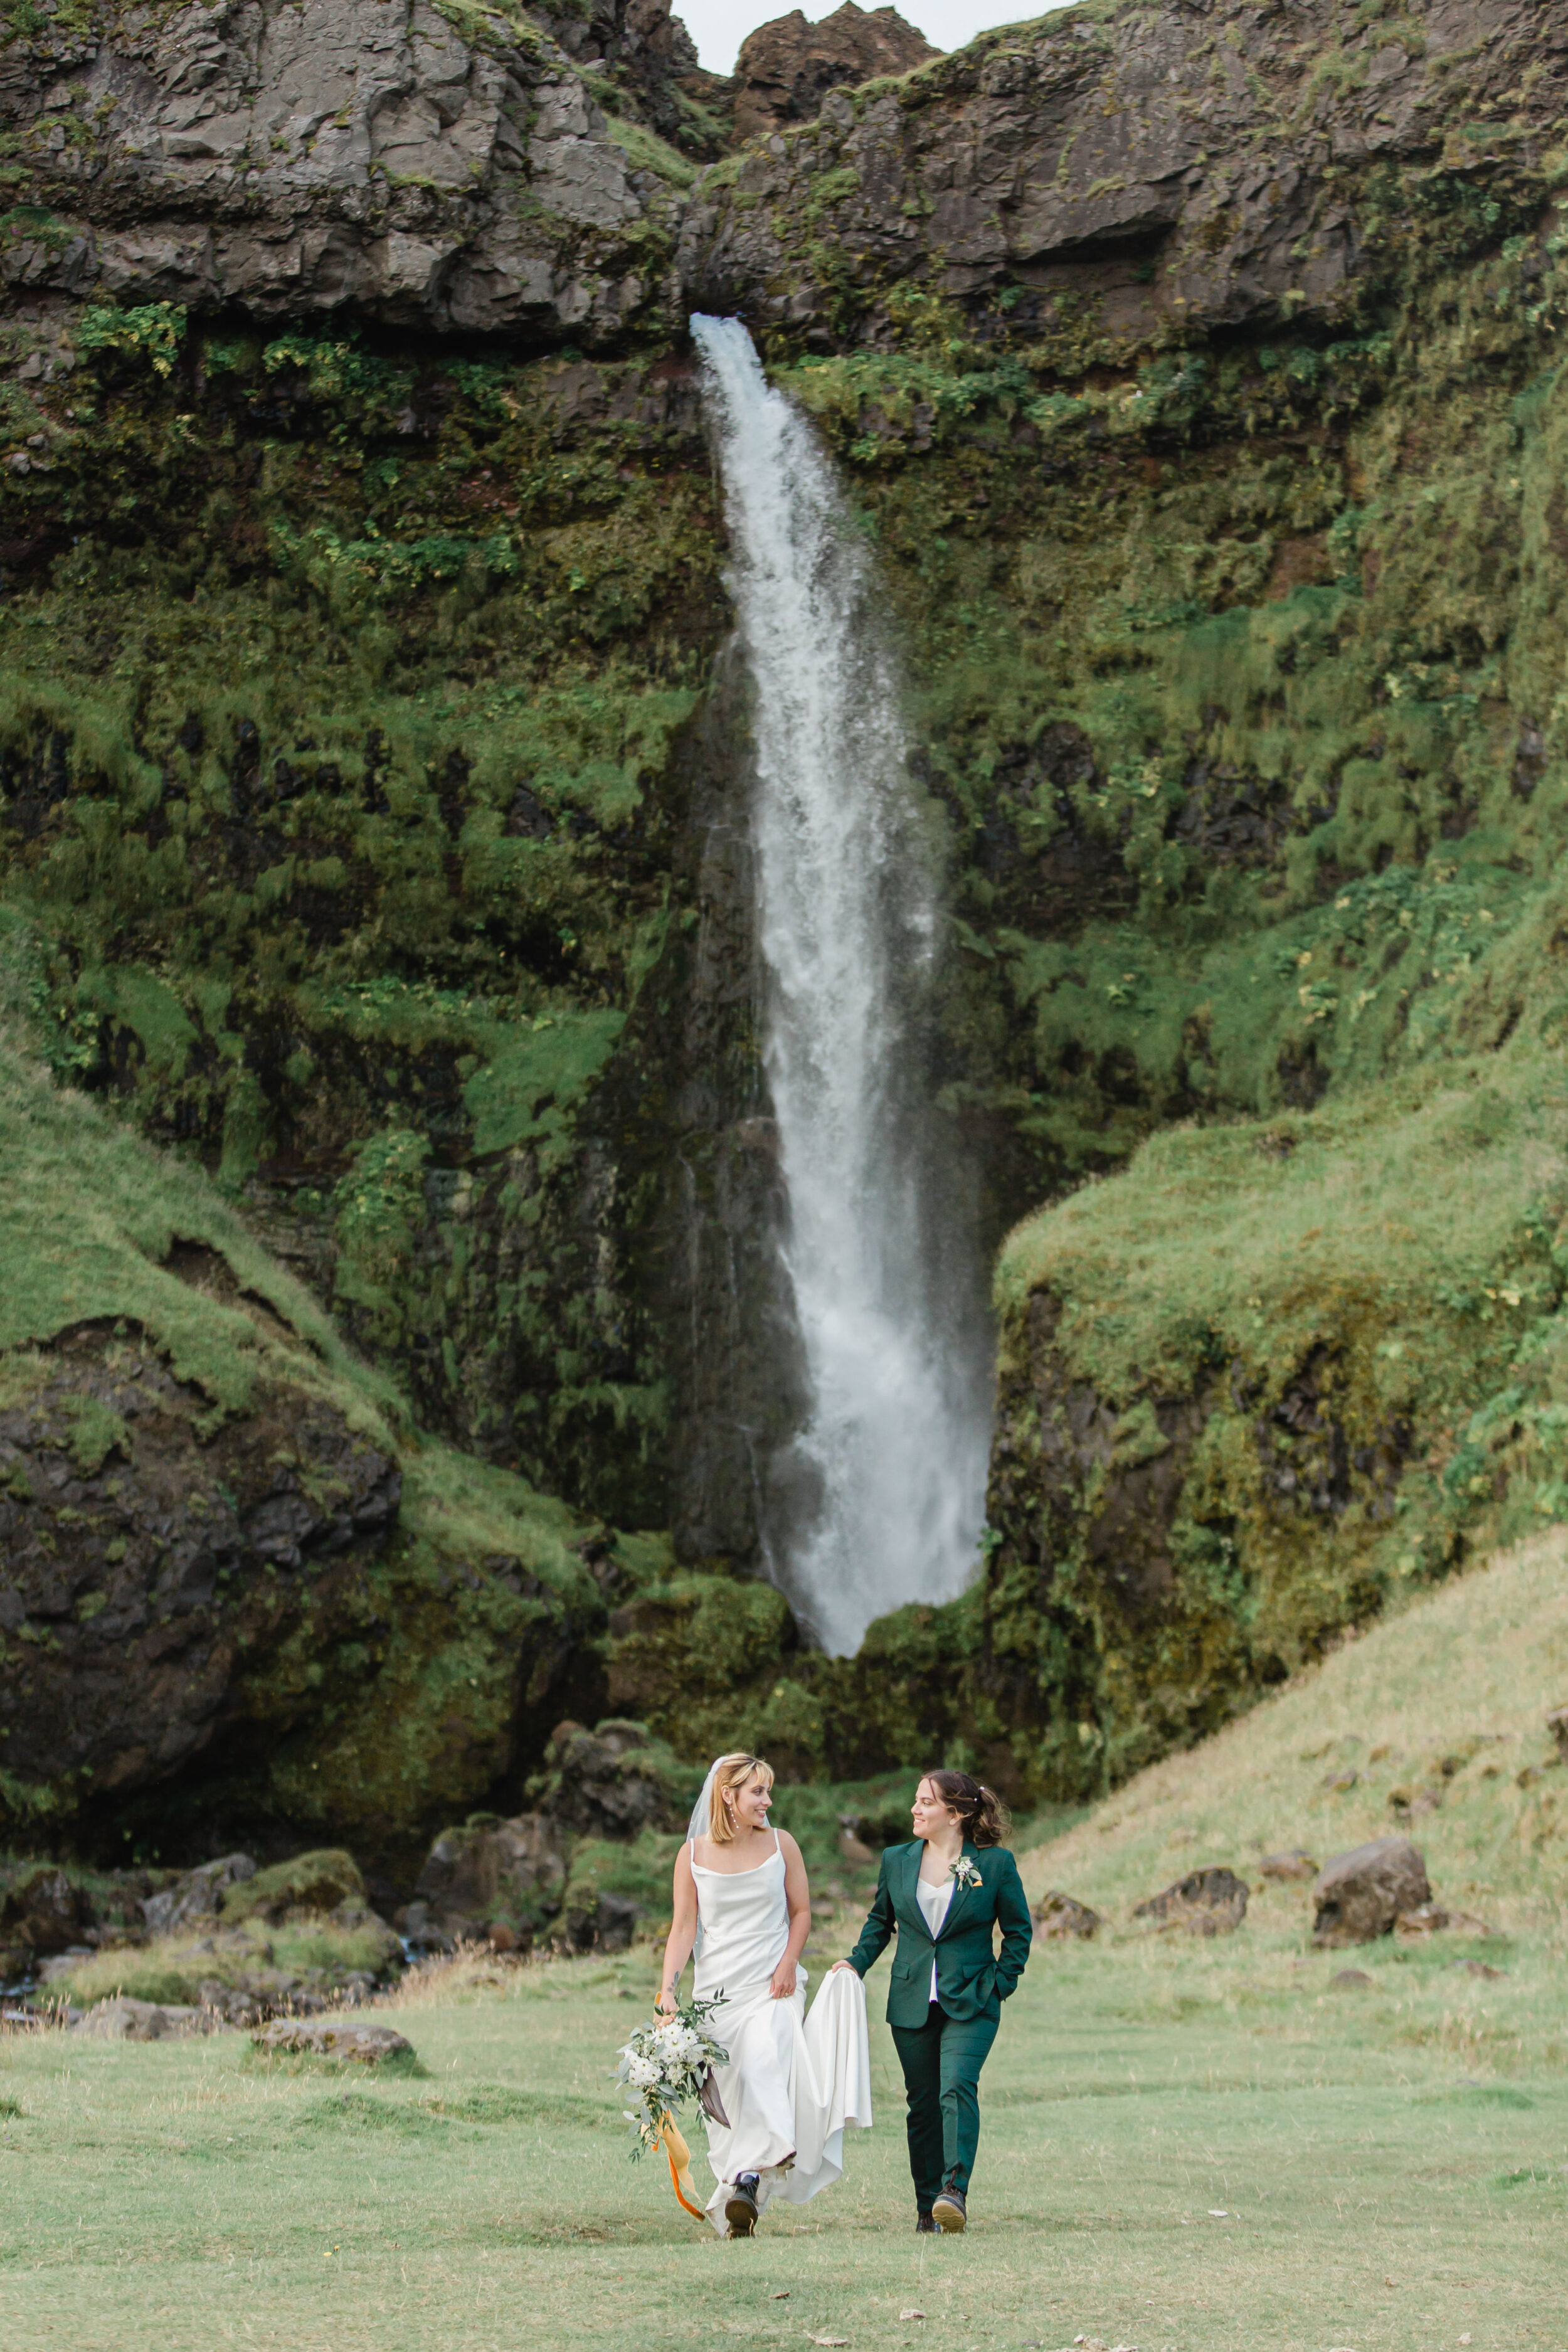 A waterfall is seen in the distance cascading down a cliff with newlyweds in the foreground.